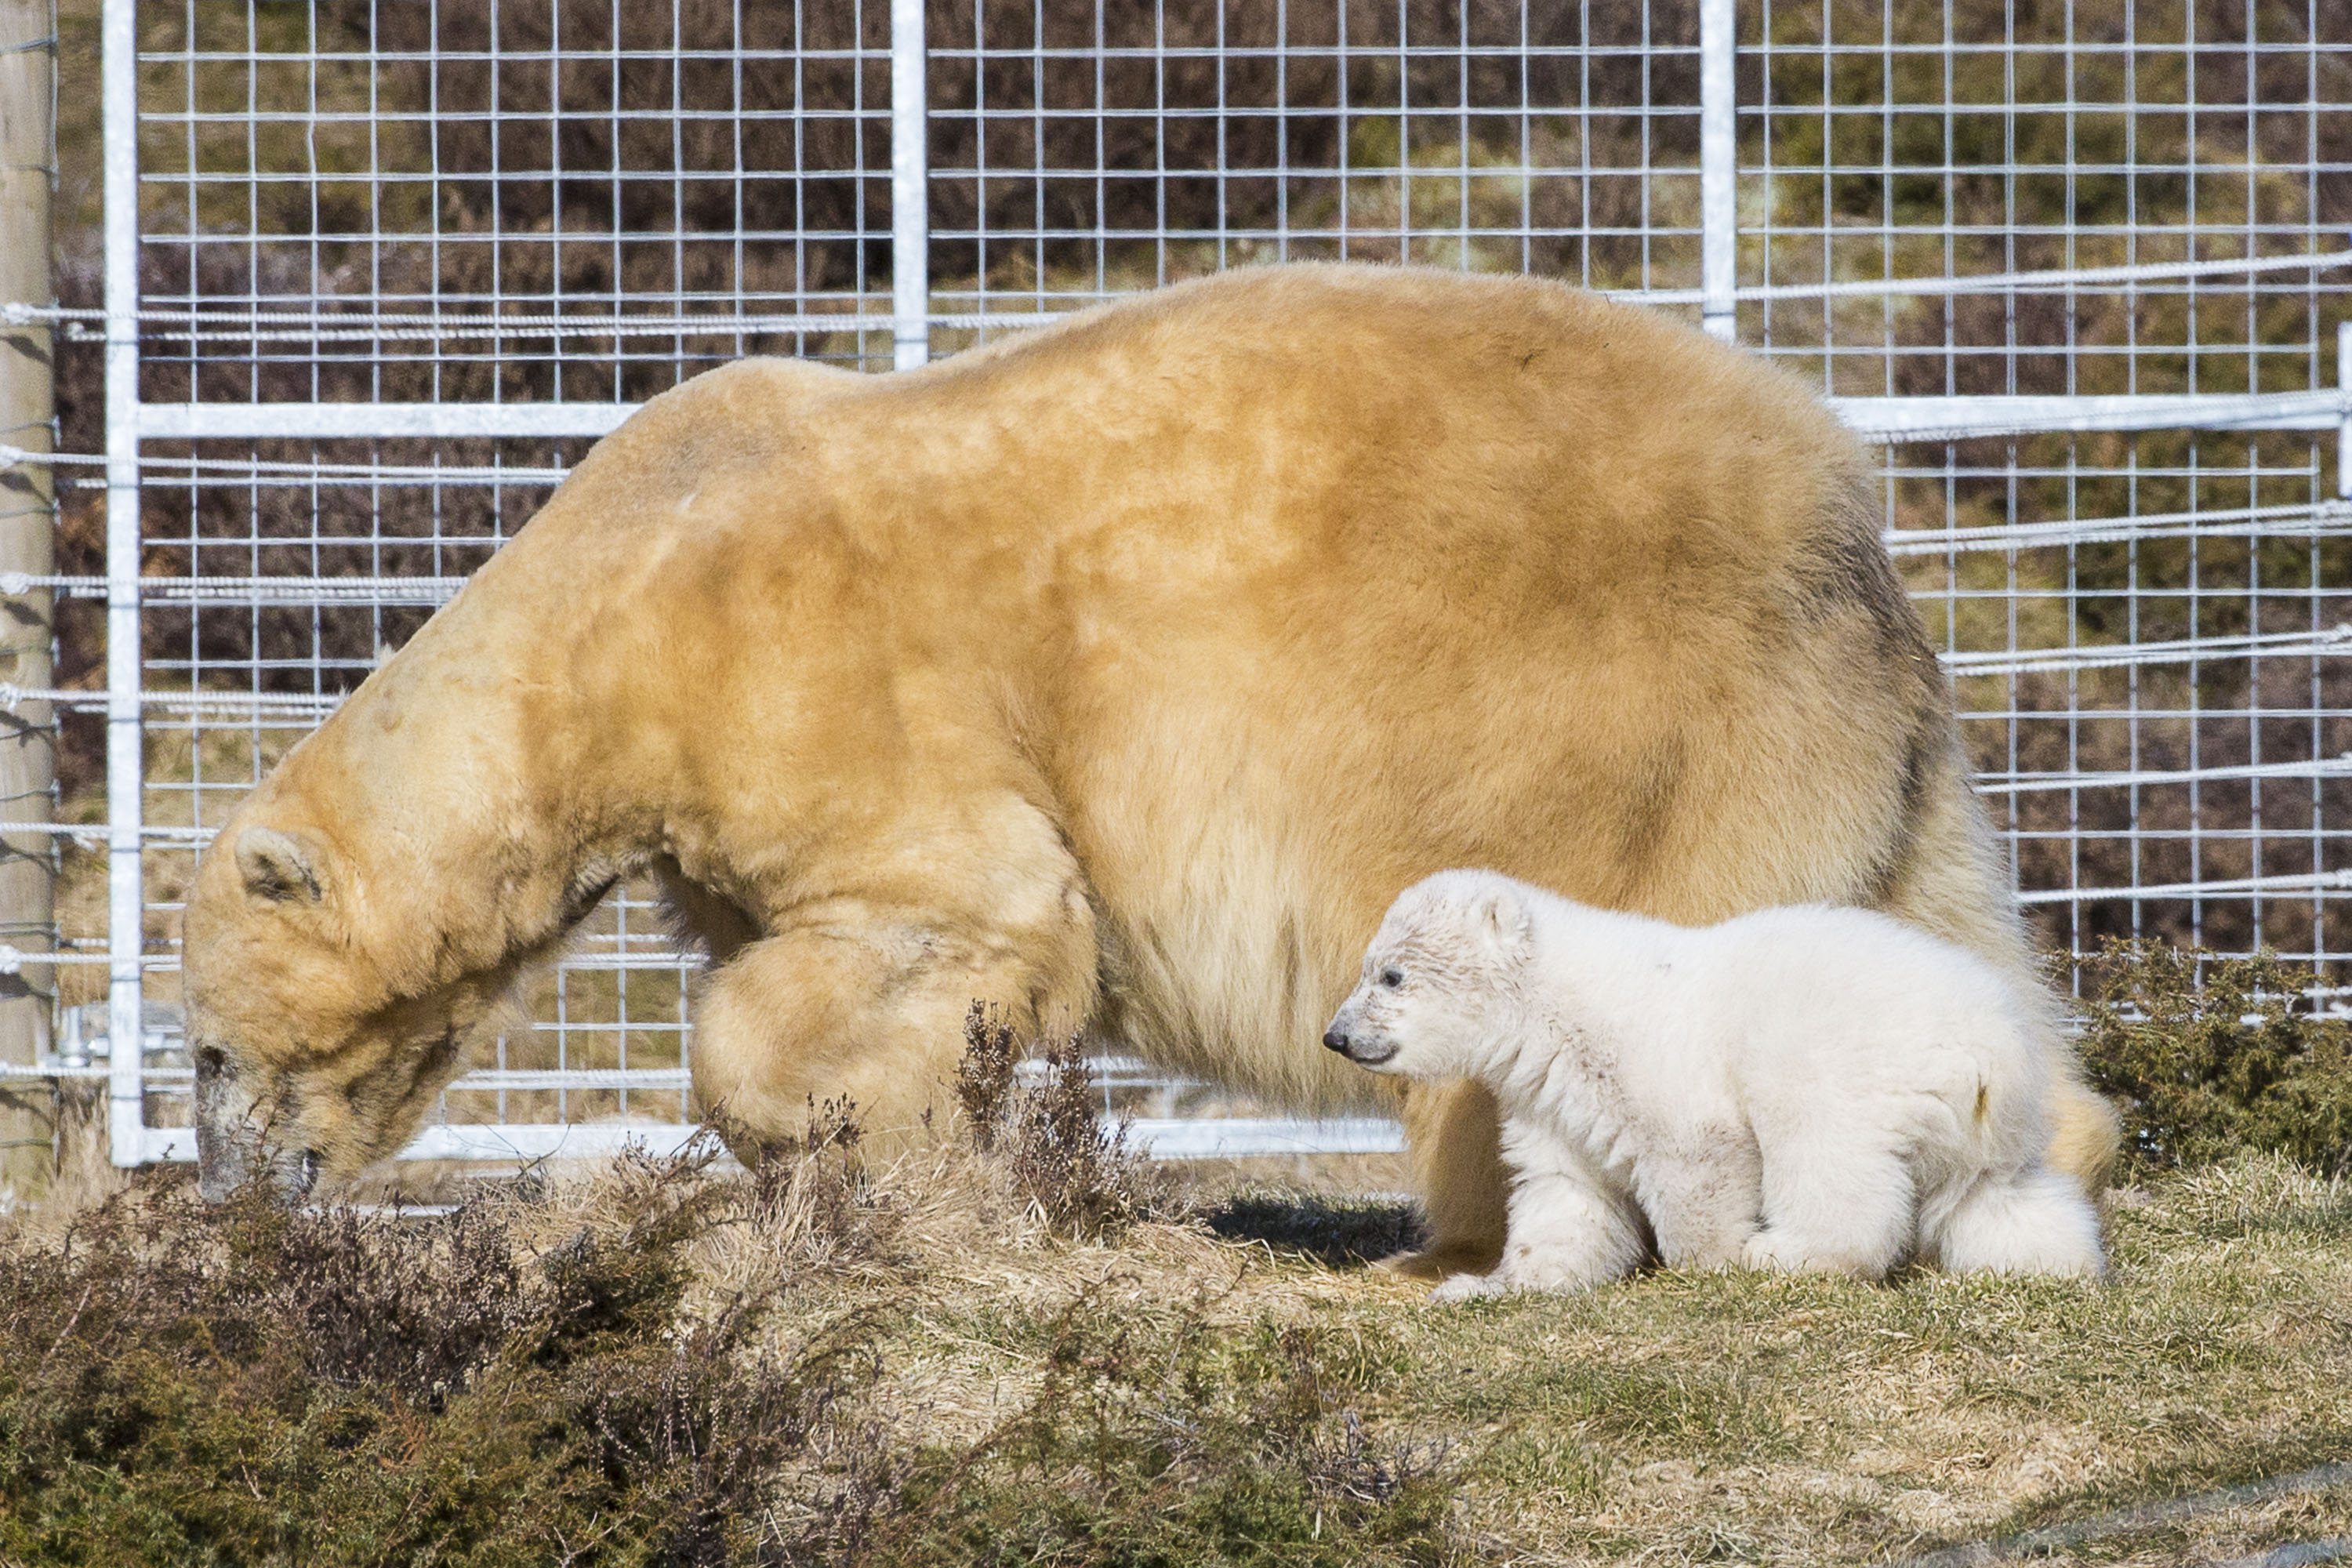 Victoria the polar bear and Hamish were seen in their outdoor enclosure at Highland Wildlife Park for the first time last year.